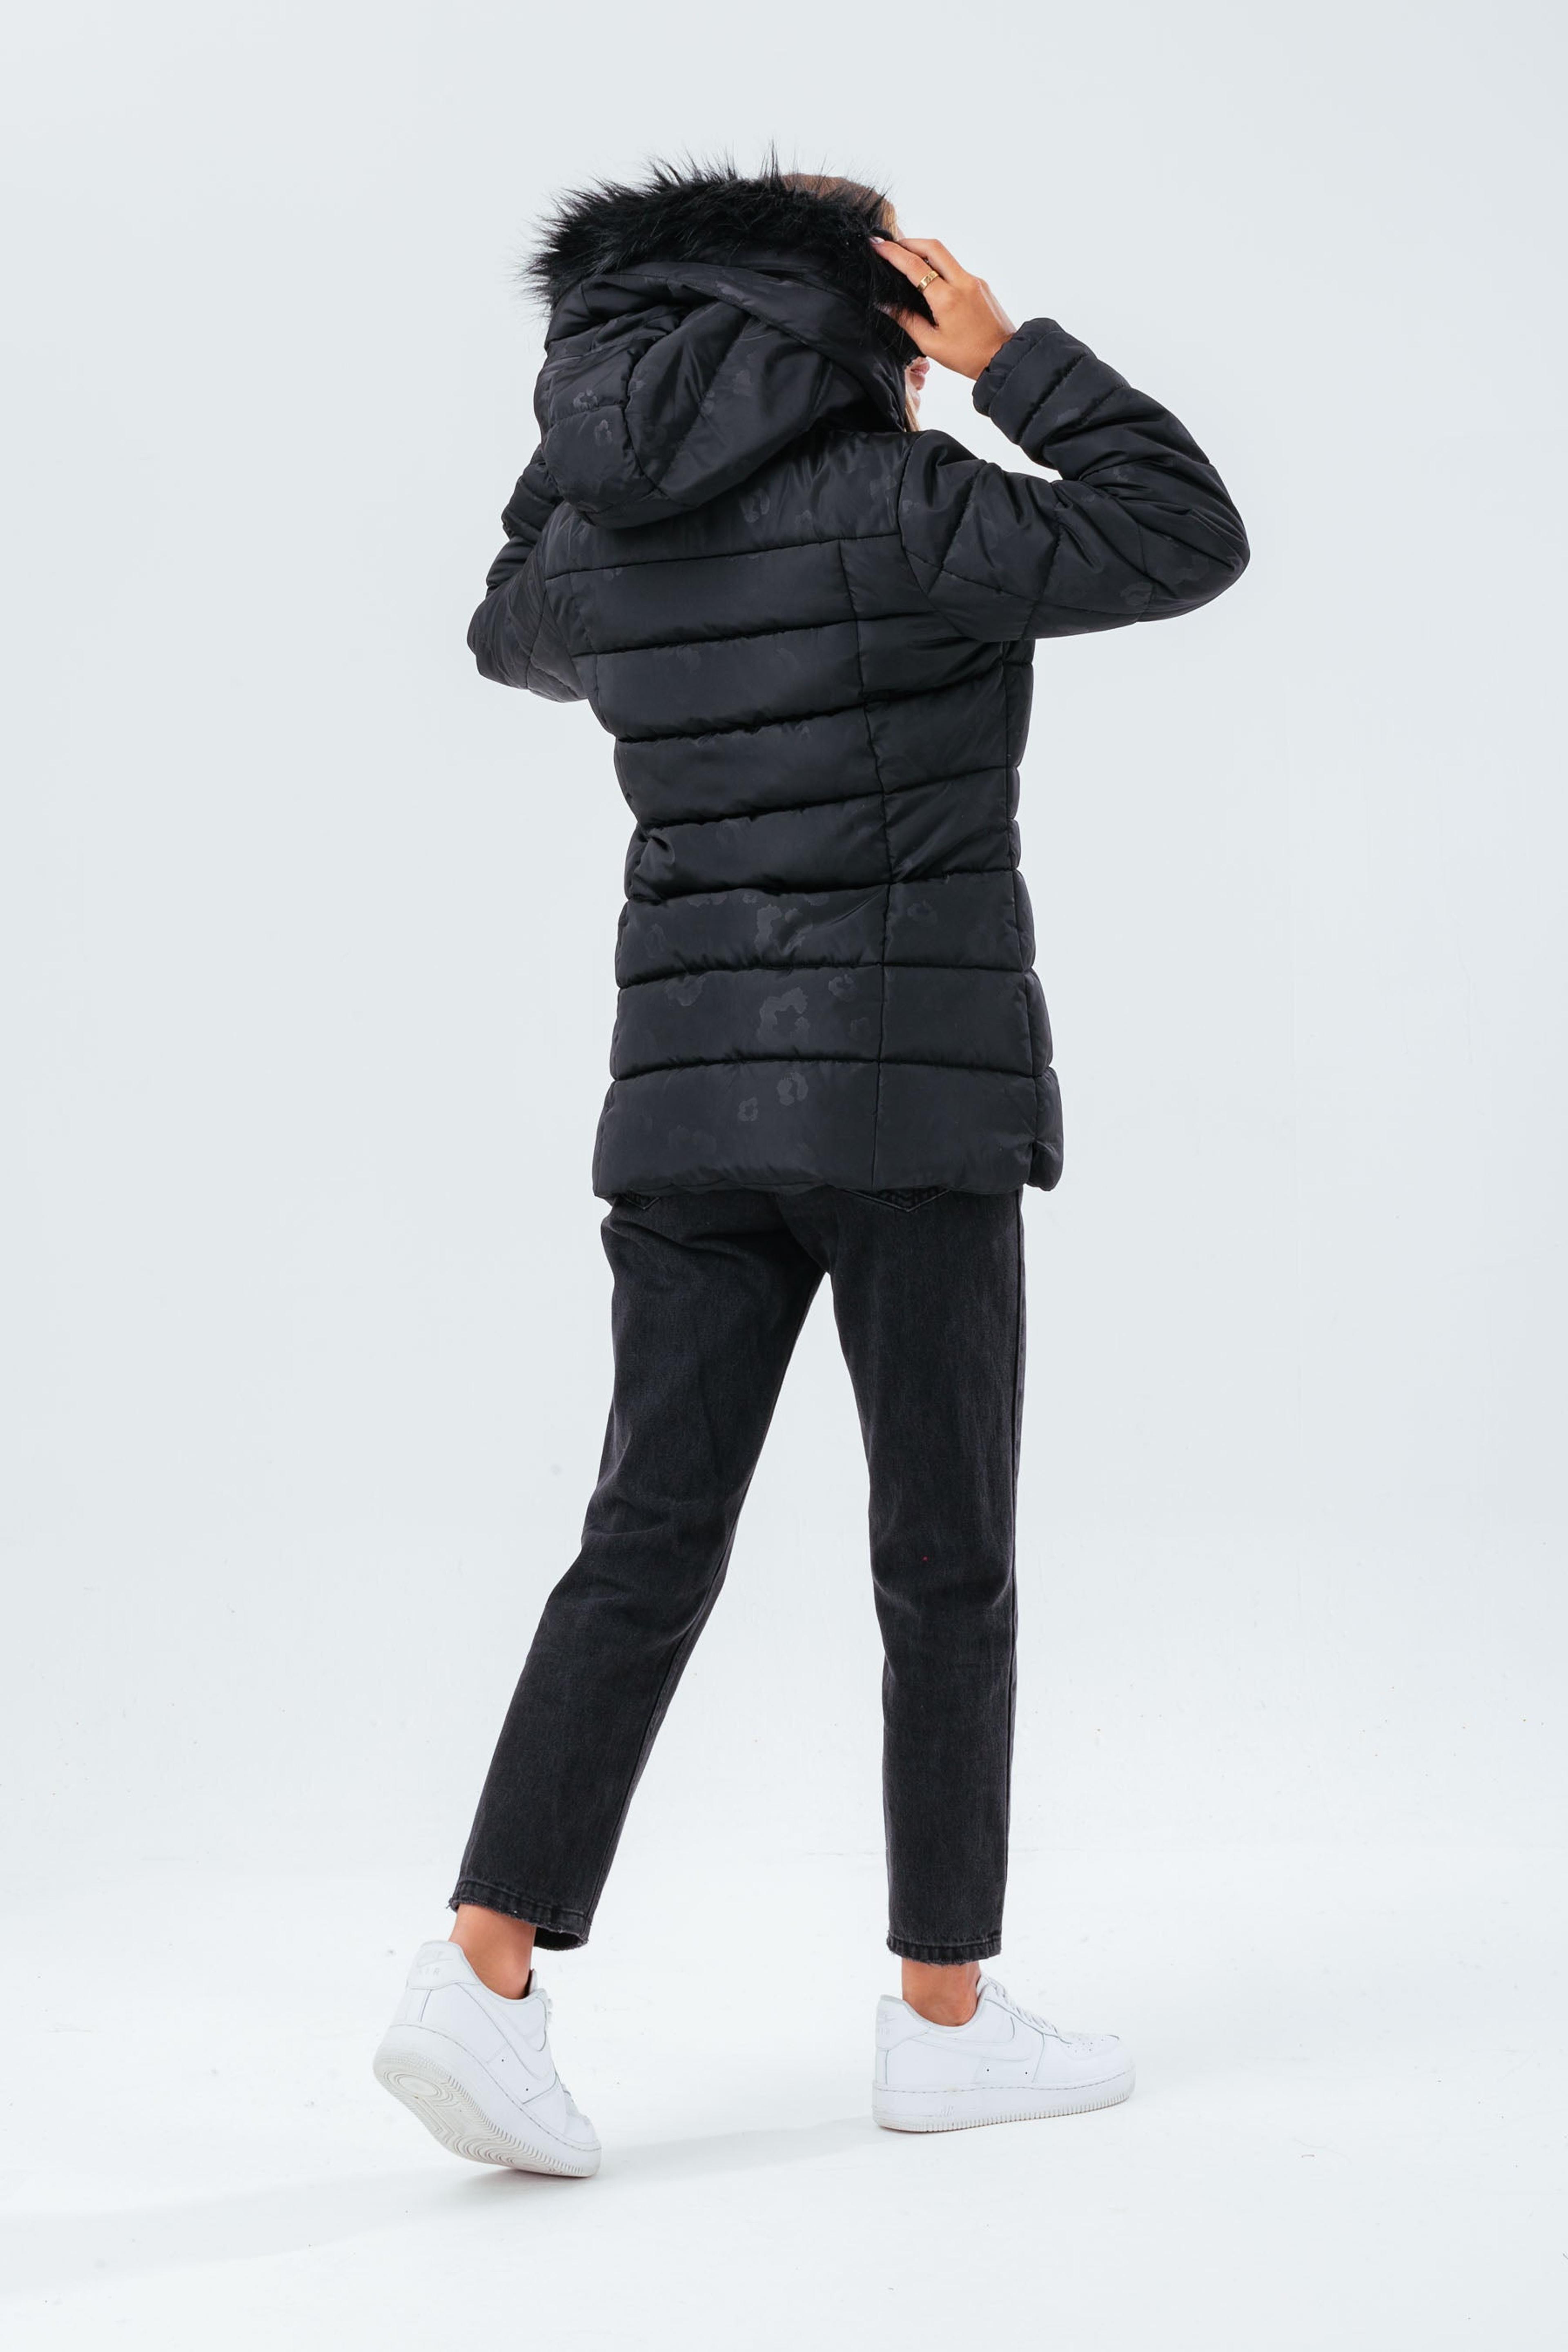 Alternate View 2 of HYPE BLACK LEOPARD MID LENGTH WOMEN'S PADDED COAT WITH FUR